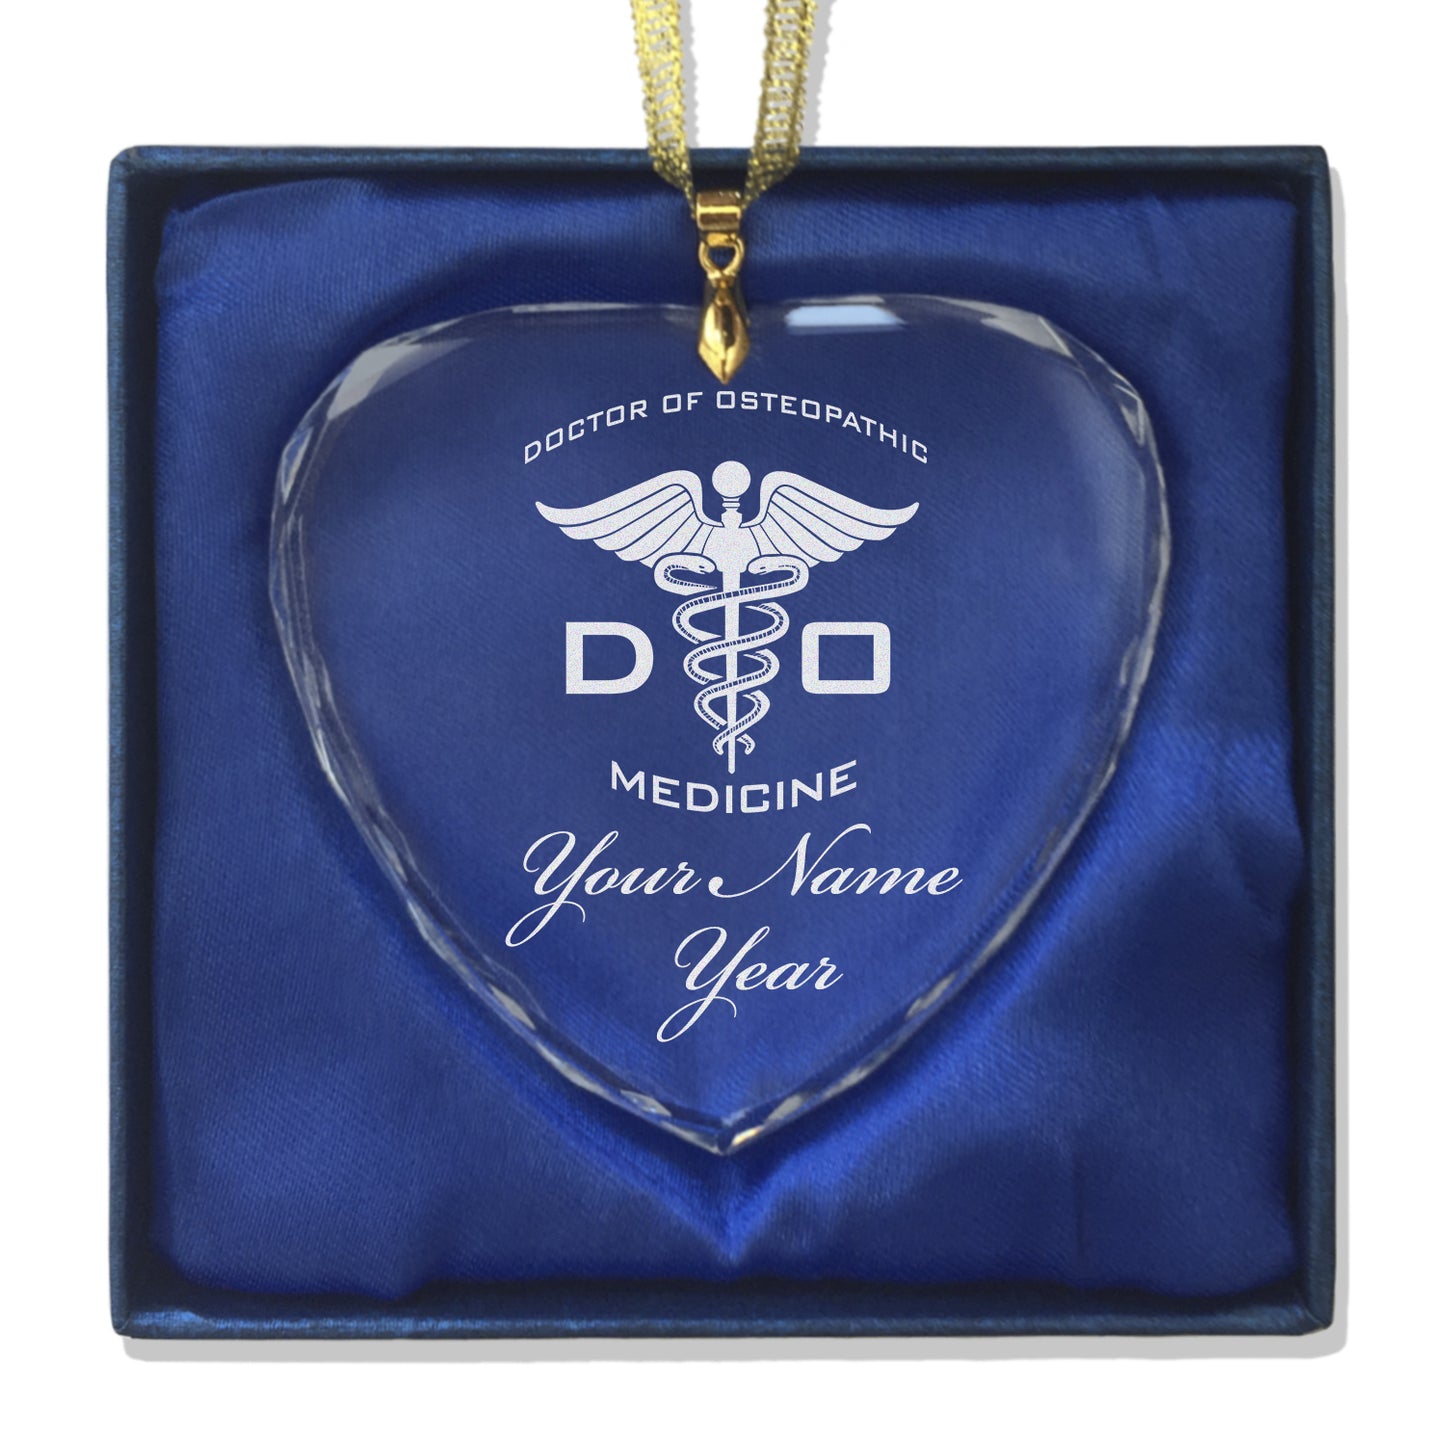 LaserGram Christmas Ornament, DO Doctor of Osteopathic Medicine, Personalized Engraving Included (Heart Shape)